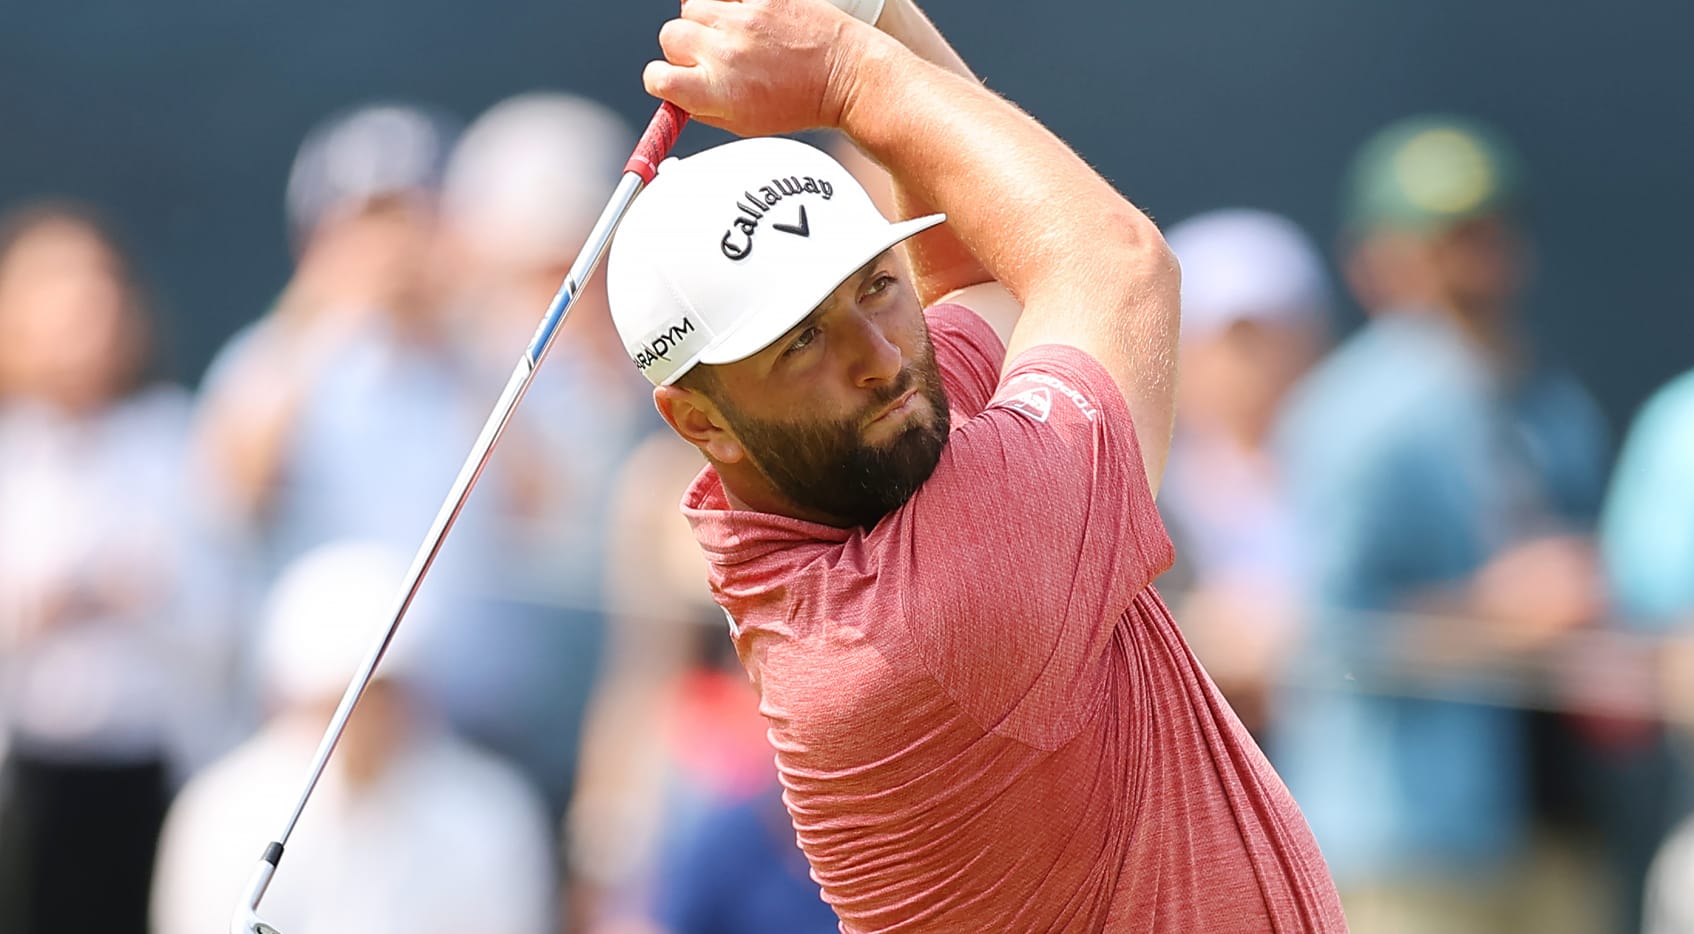 Power Rankings the Memorial Tournament presented by Workday PGA TOUR